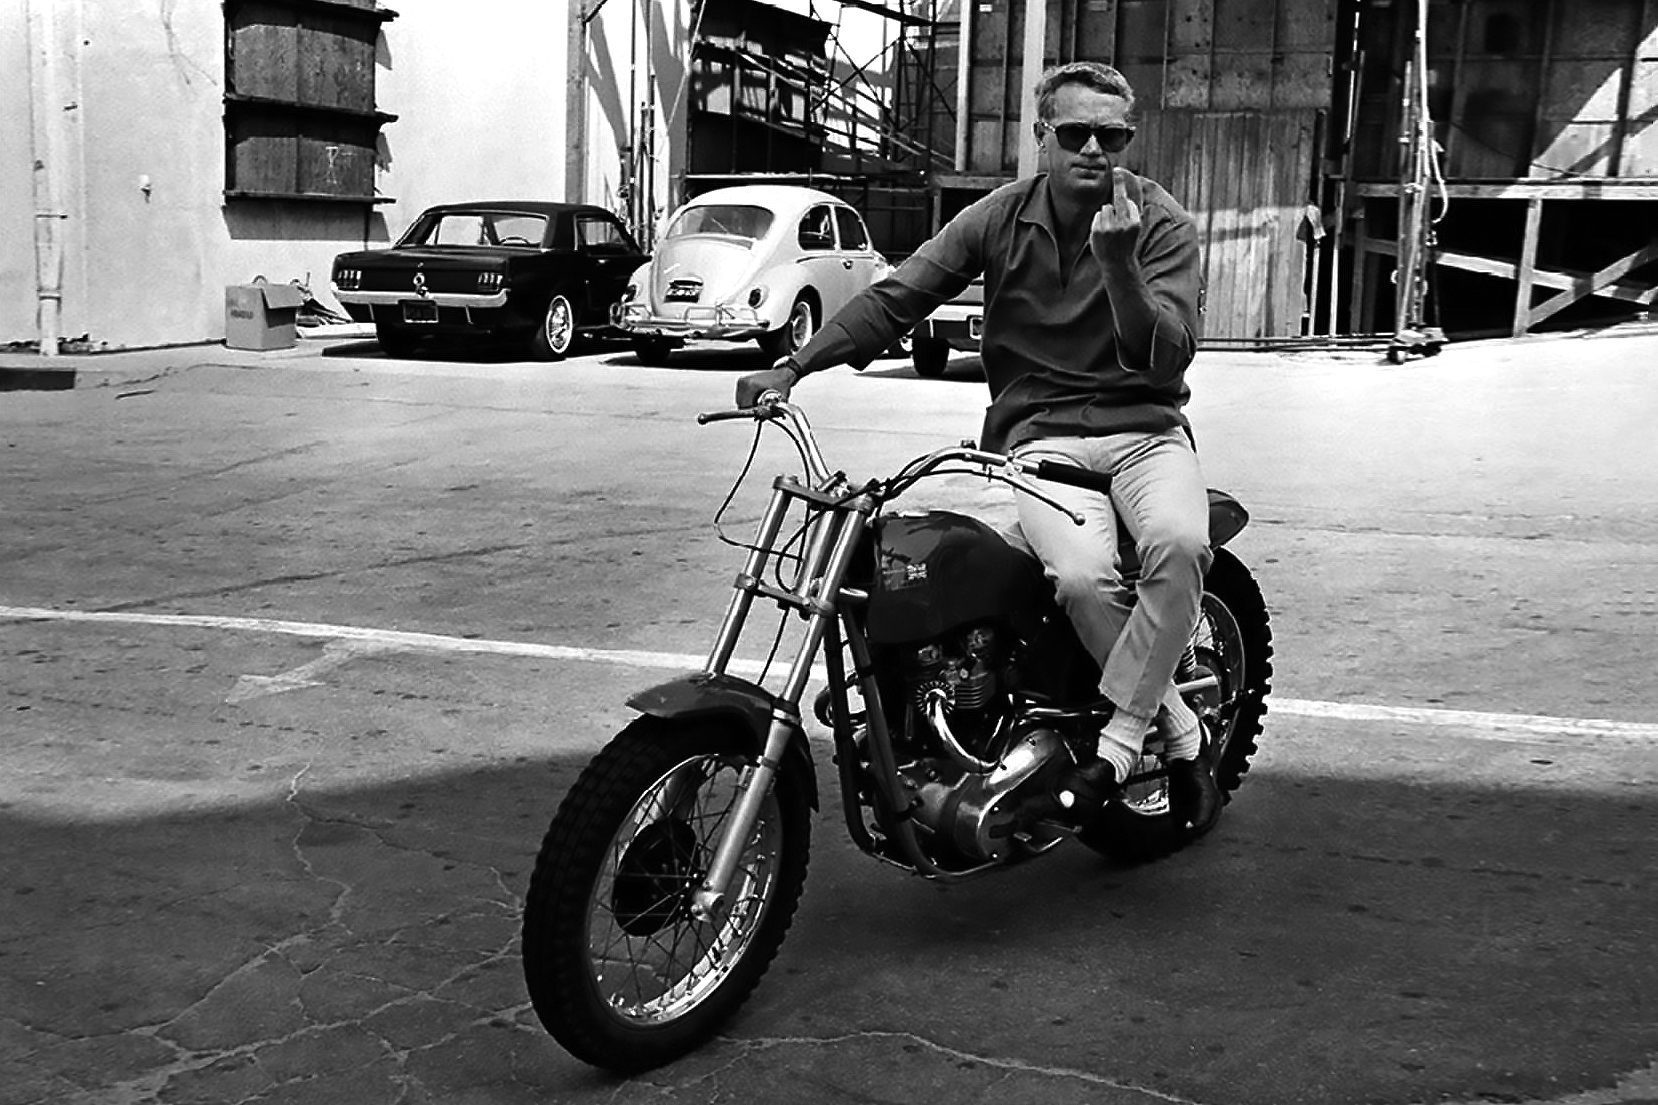 Steve McQueen and the Sexiest Cars and Motorcycles on Film - Bloomberg